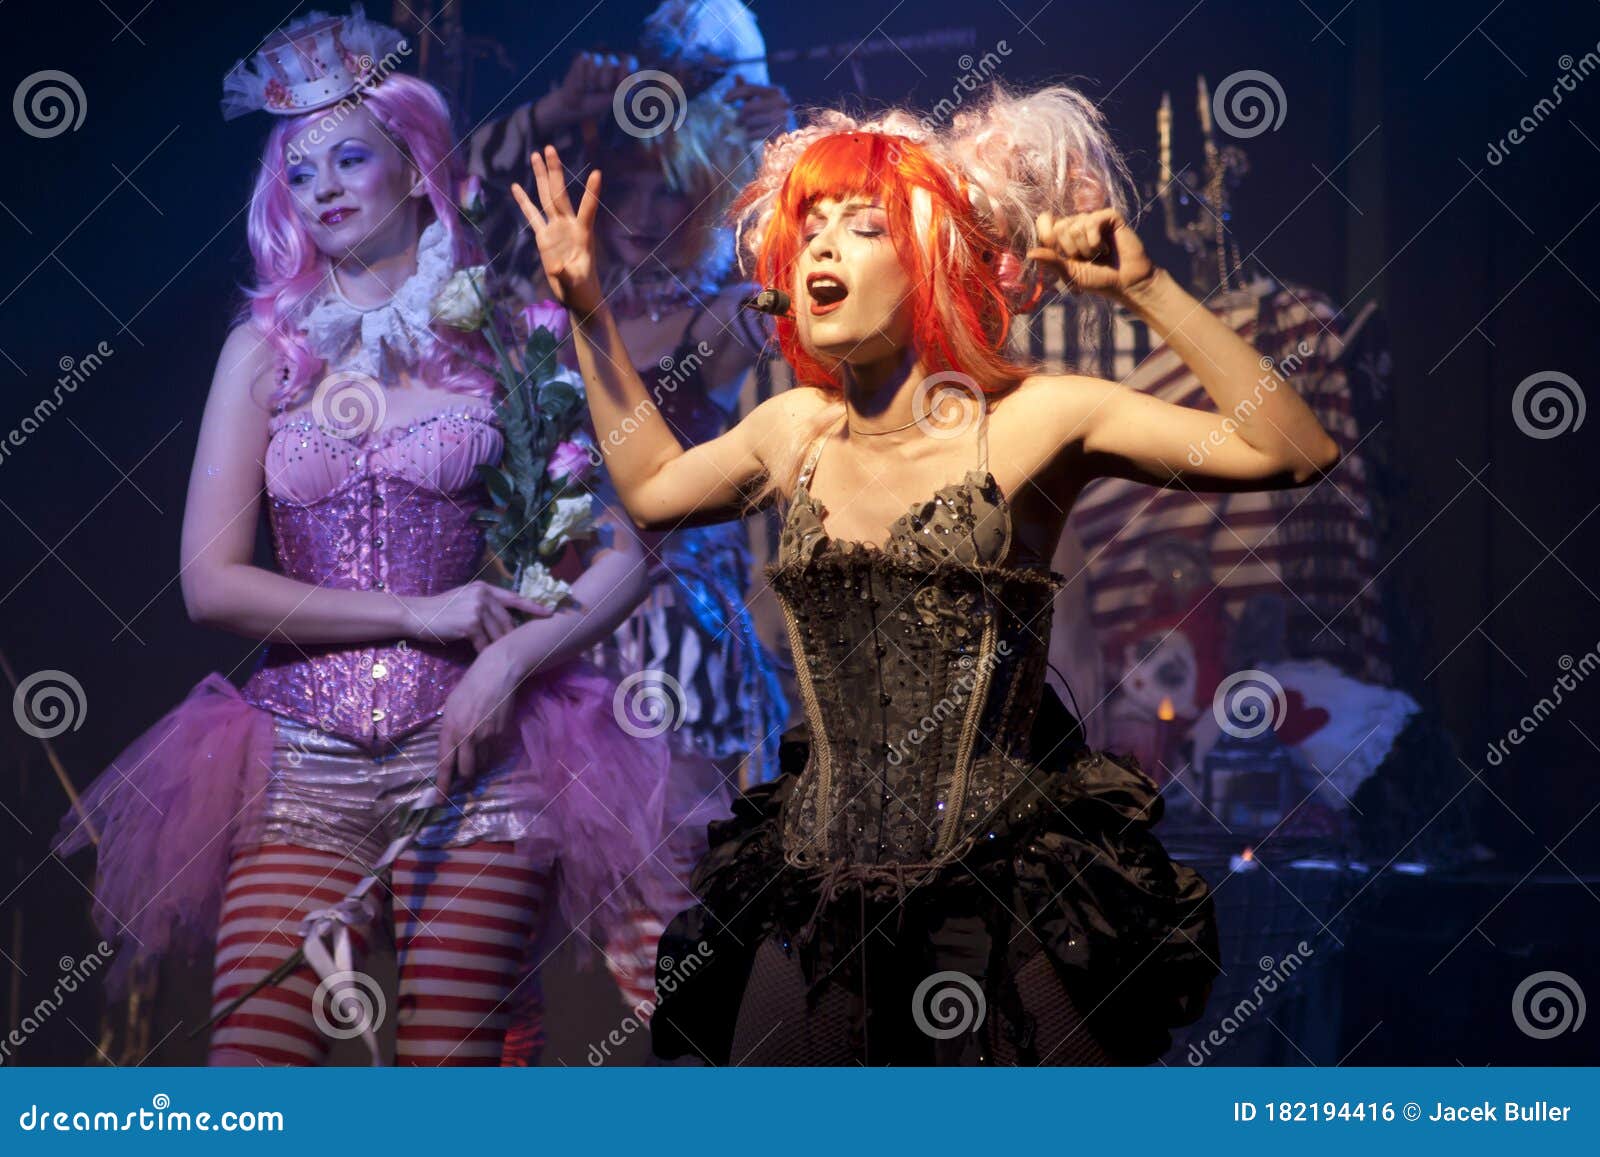 Emilie Autumn Concert At The Club Progresja In Warsaw Poland 2 04 09 Editorial Photo Image Of Lights Autumn